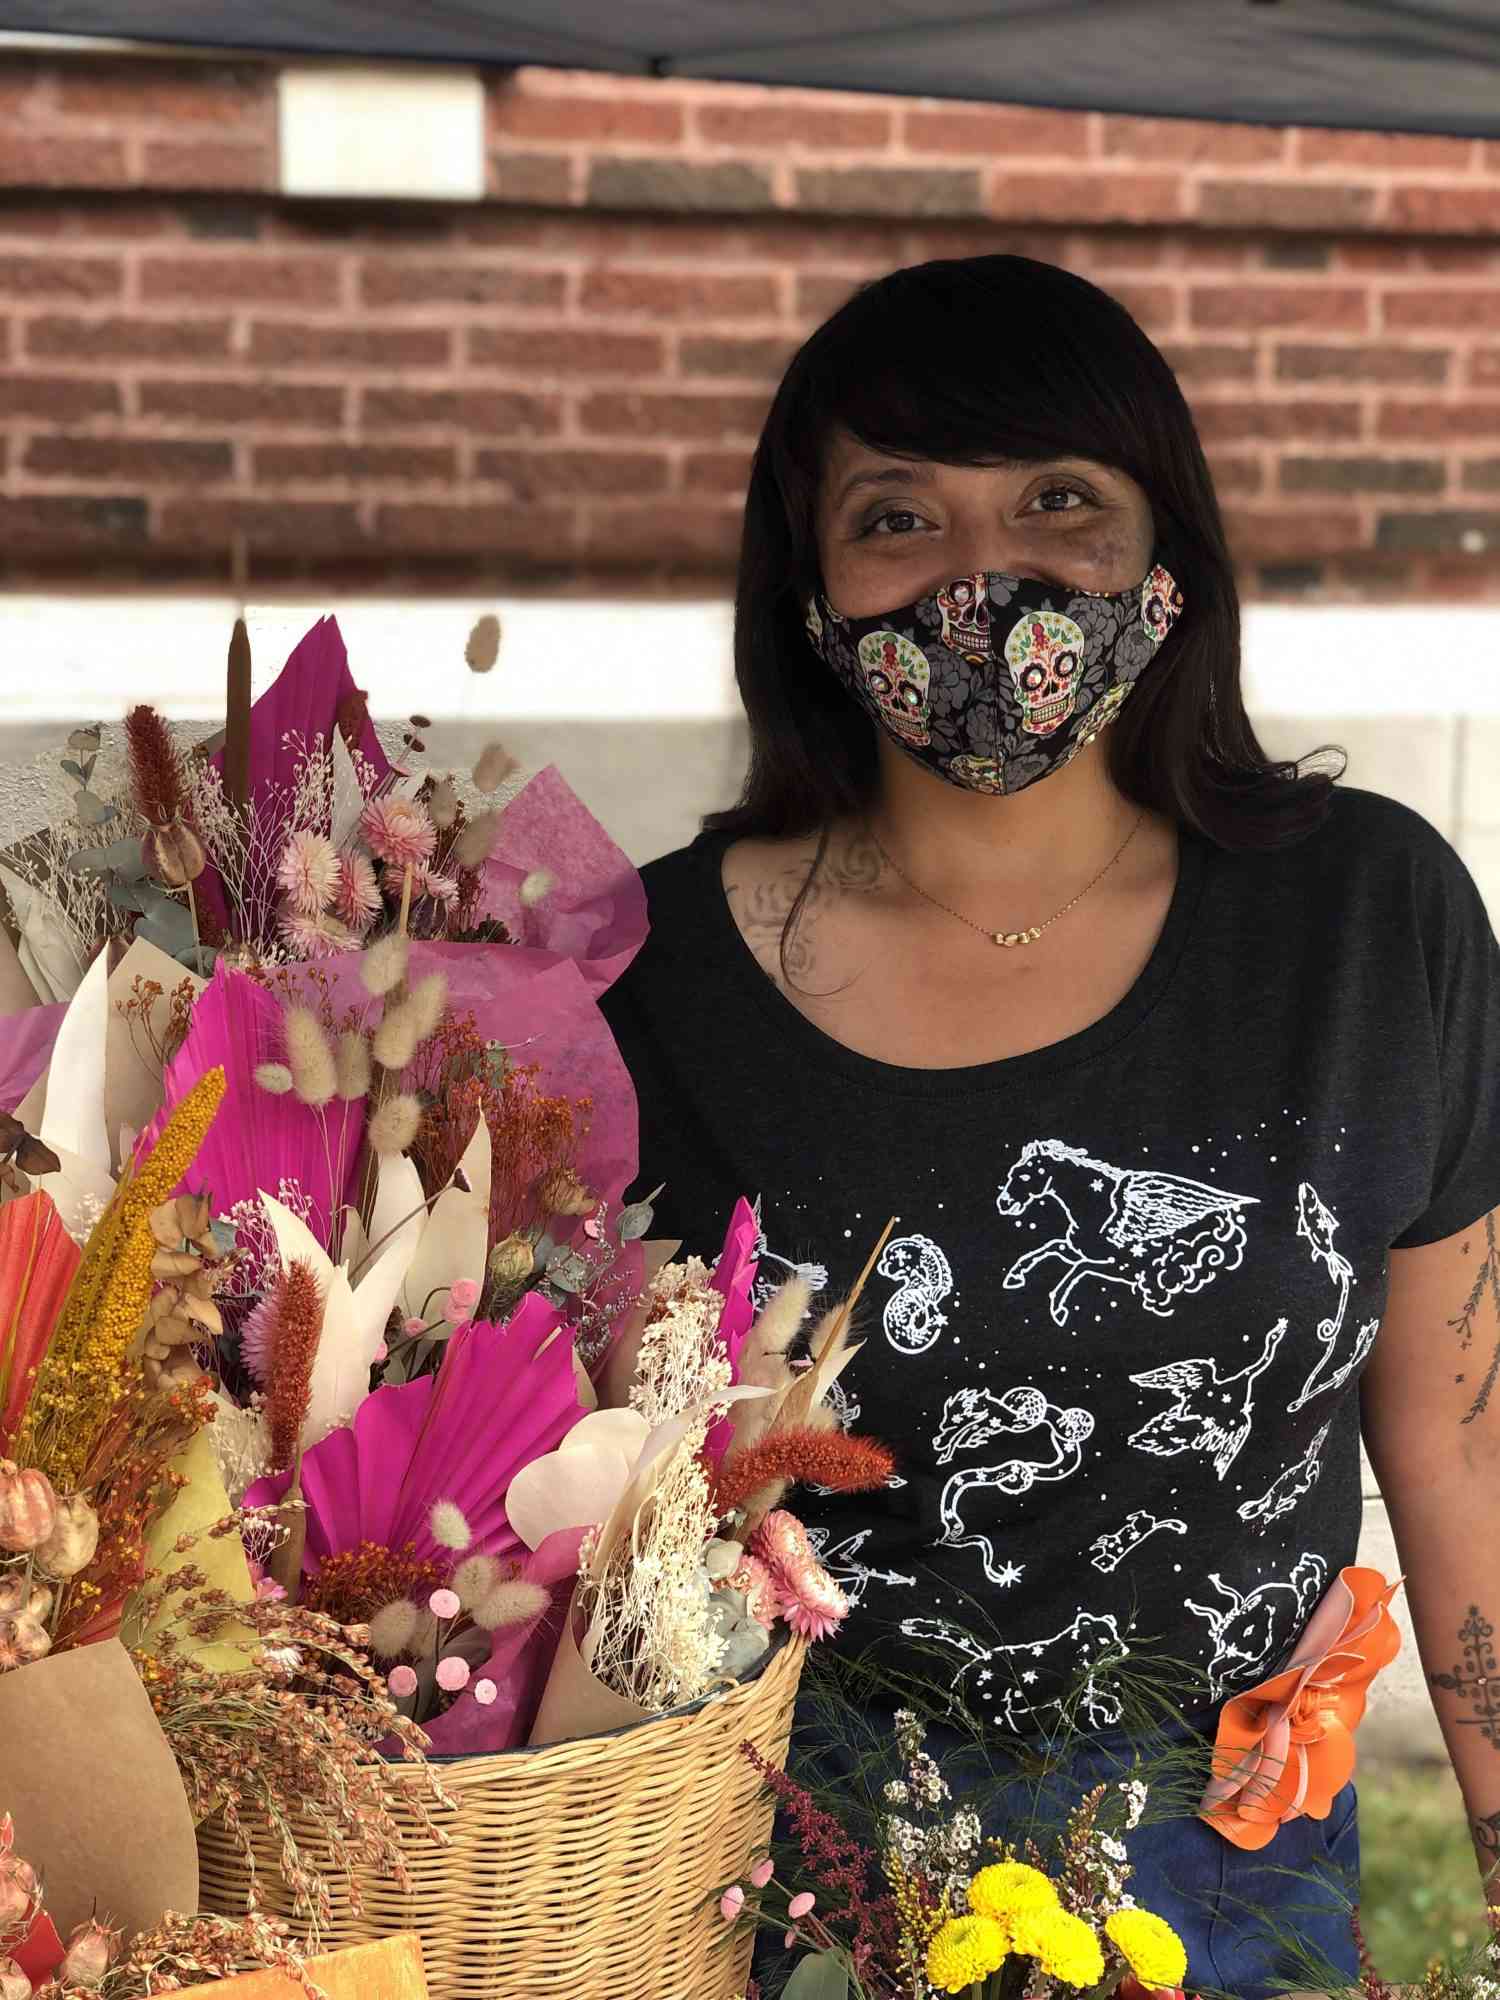 Karina Castellon posing with dried floral bouquets